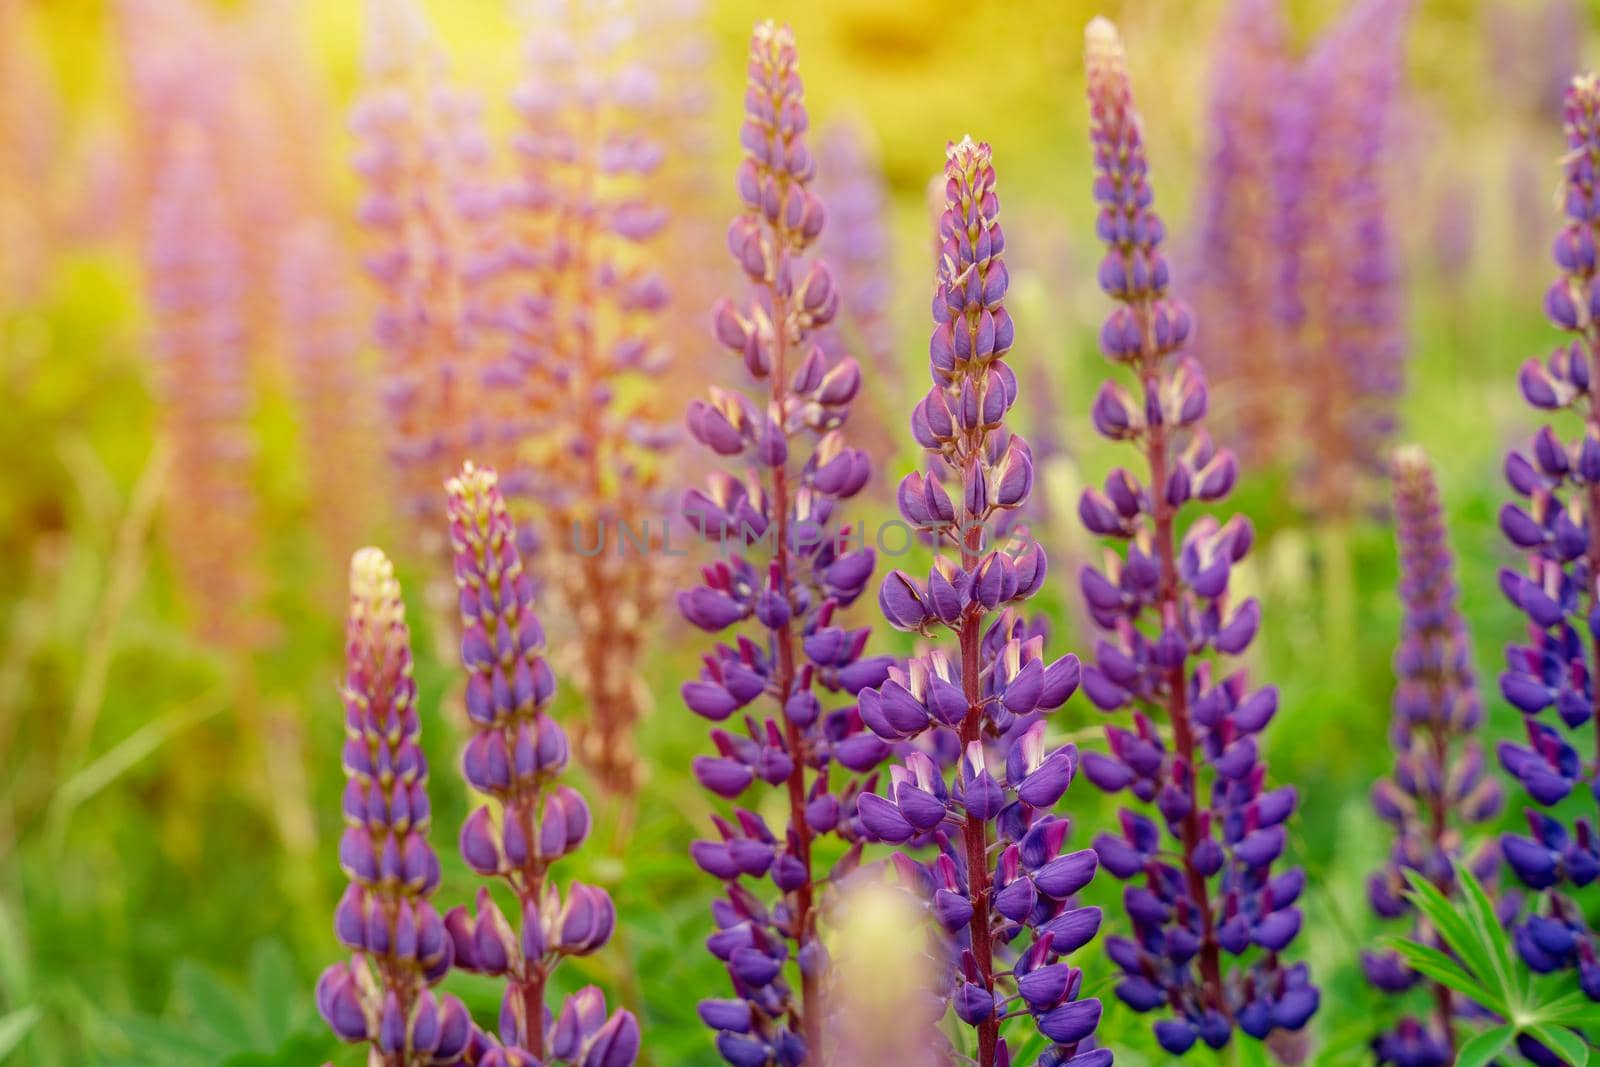 lupine flowers on meadow at sunset on a warm summer day Summer flowers. Summertime Space for text High quality photo